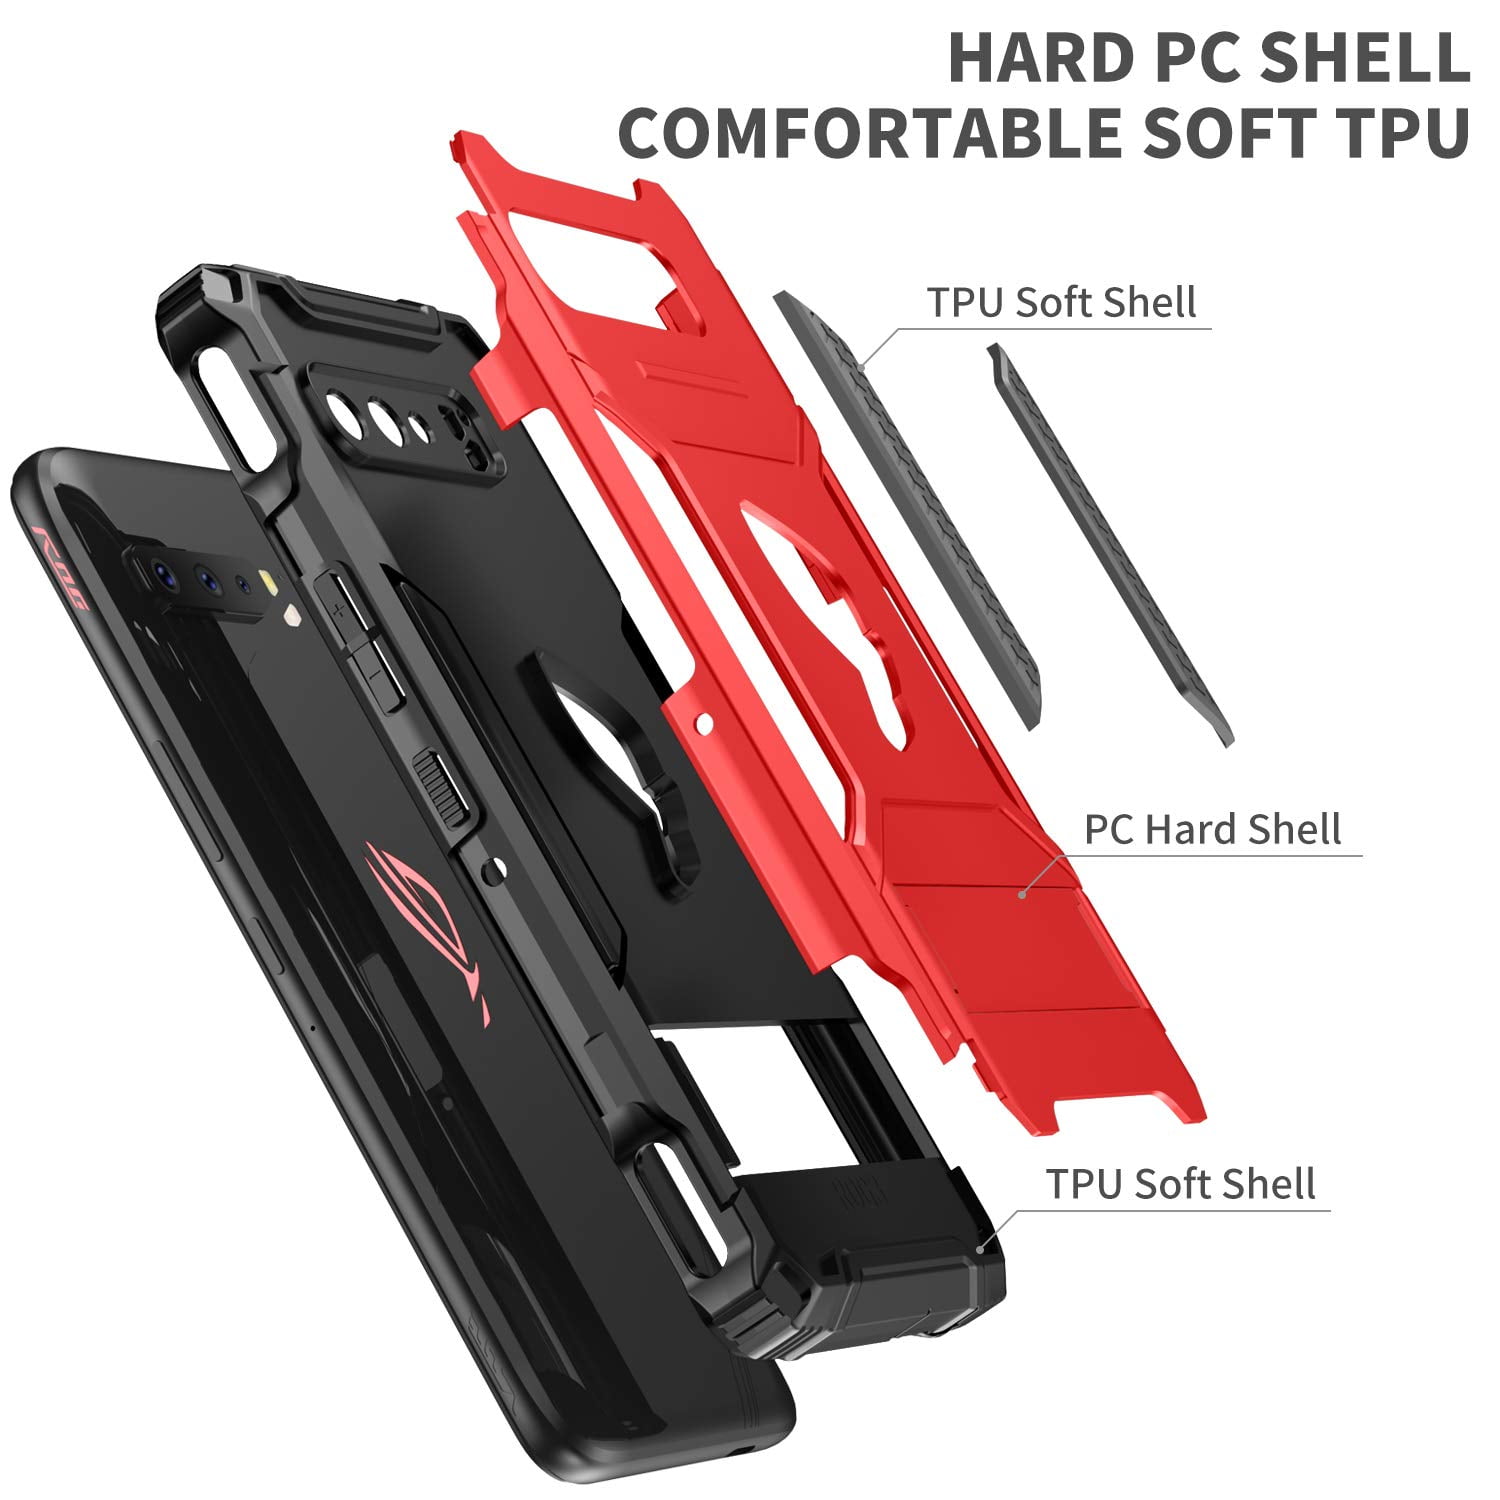 Fanbiya Armor Case for ASUS ROG Phone 3, Built in Kickstand and Camera  Cover, Dust-Proof for Charging Port and Cooler Port, Military Grade  Shockproof